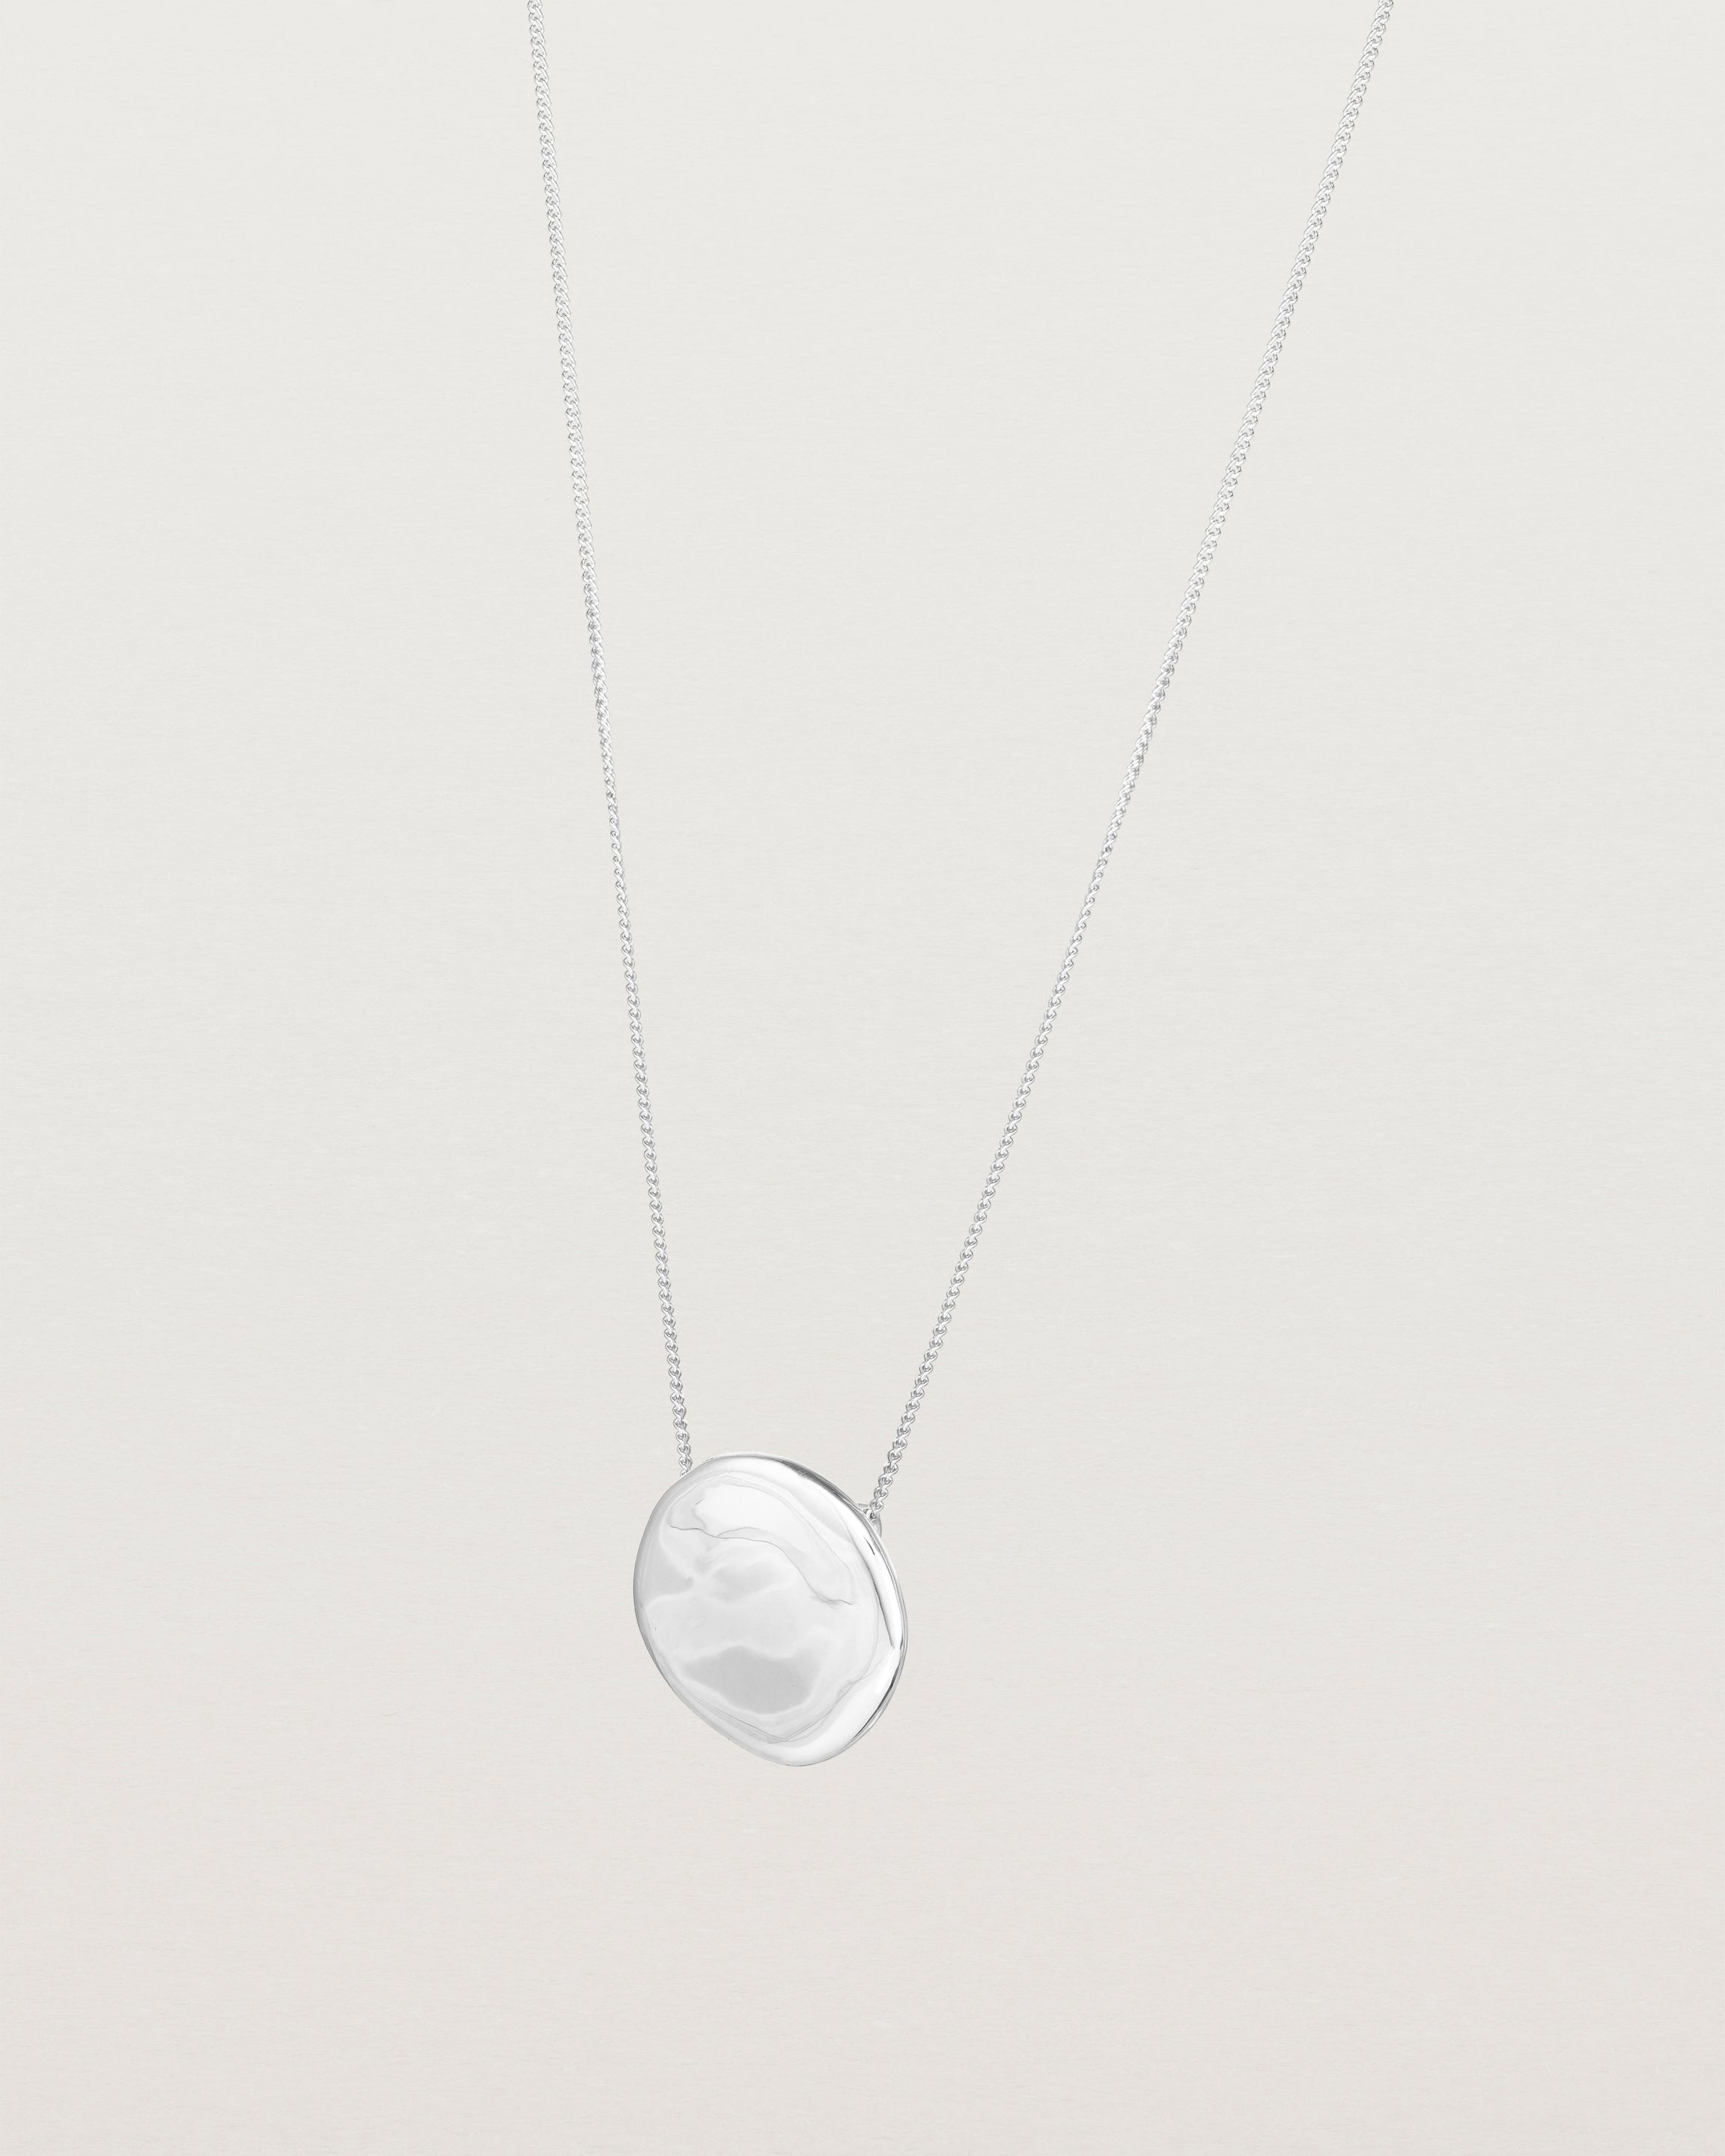 Angled view of the Mana Necklace in sterling silver.